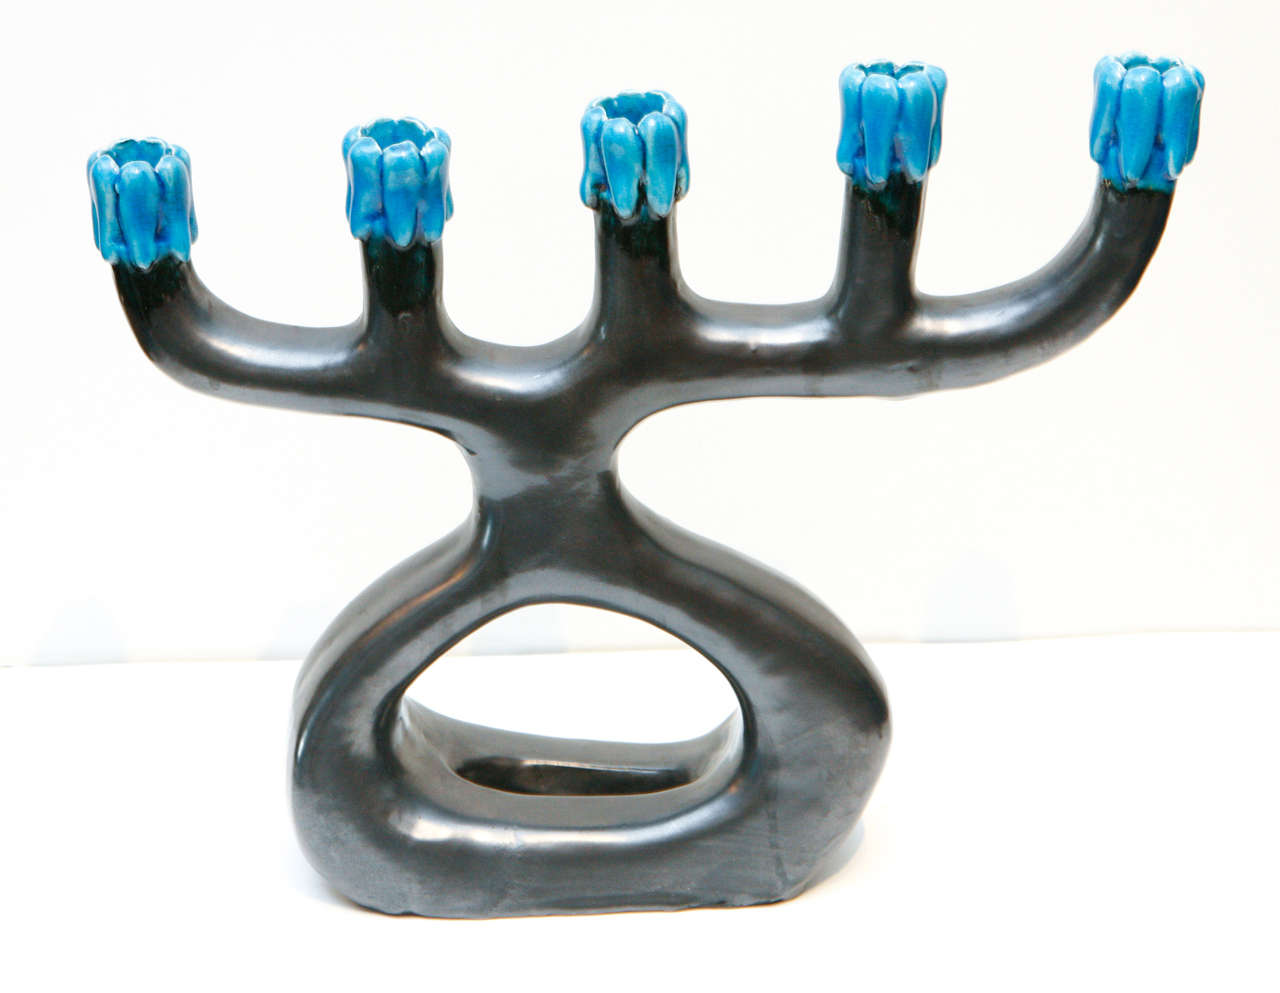 Uniquely shaped five-light Chinese candelabra.